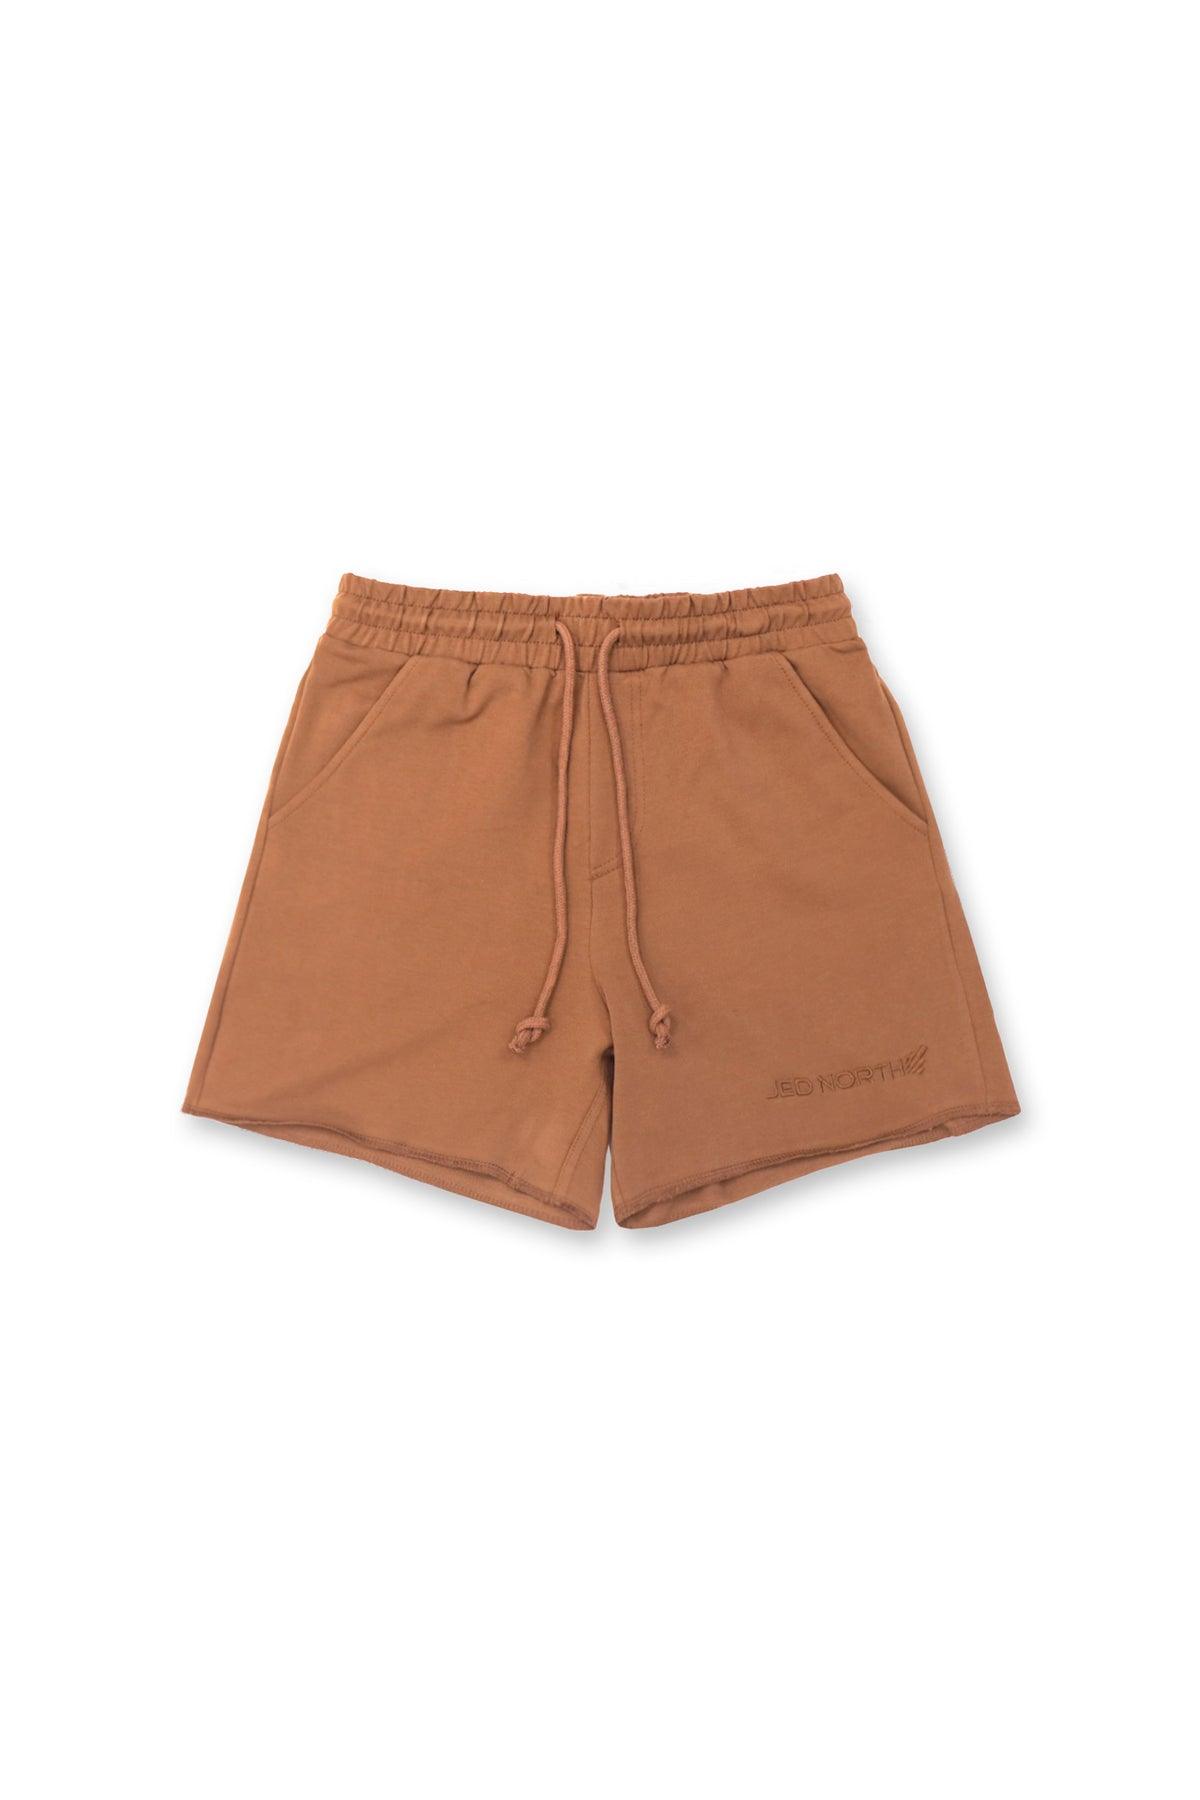 Motion 5'' Varsity Sweat Shorts - Brown - Jed North